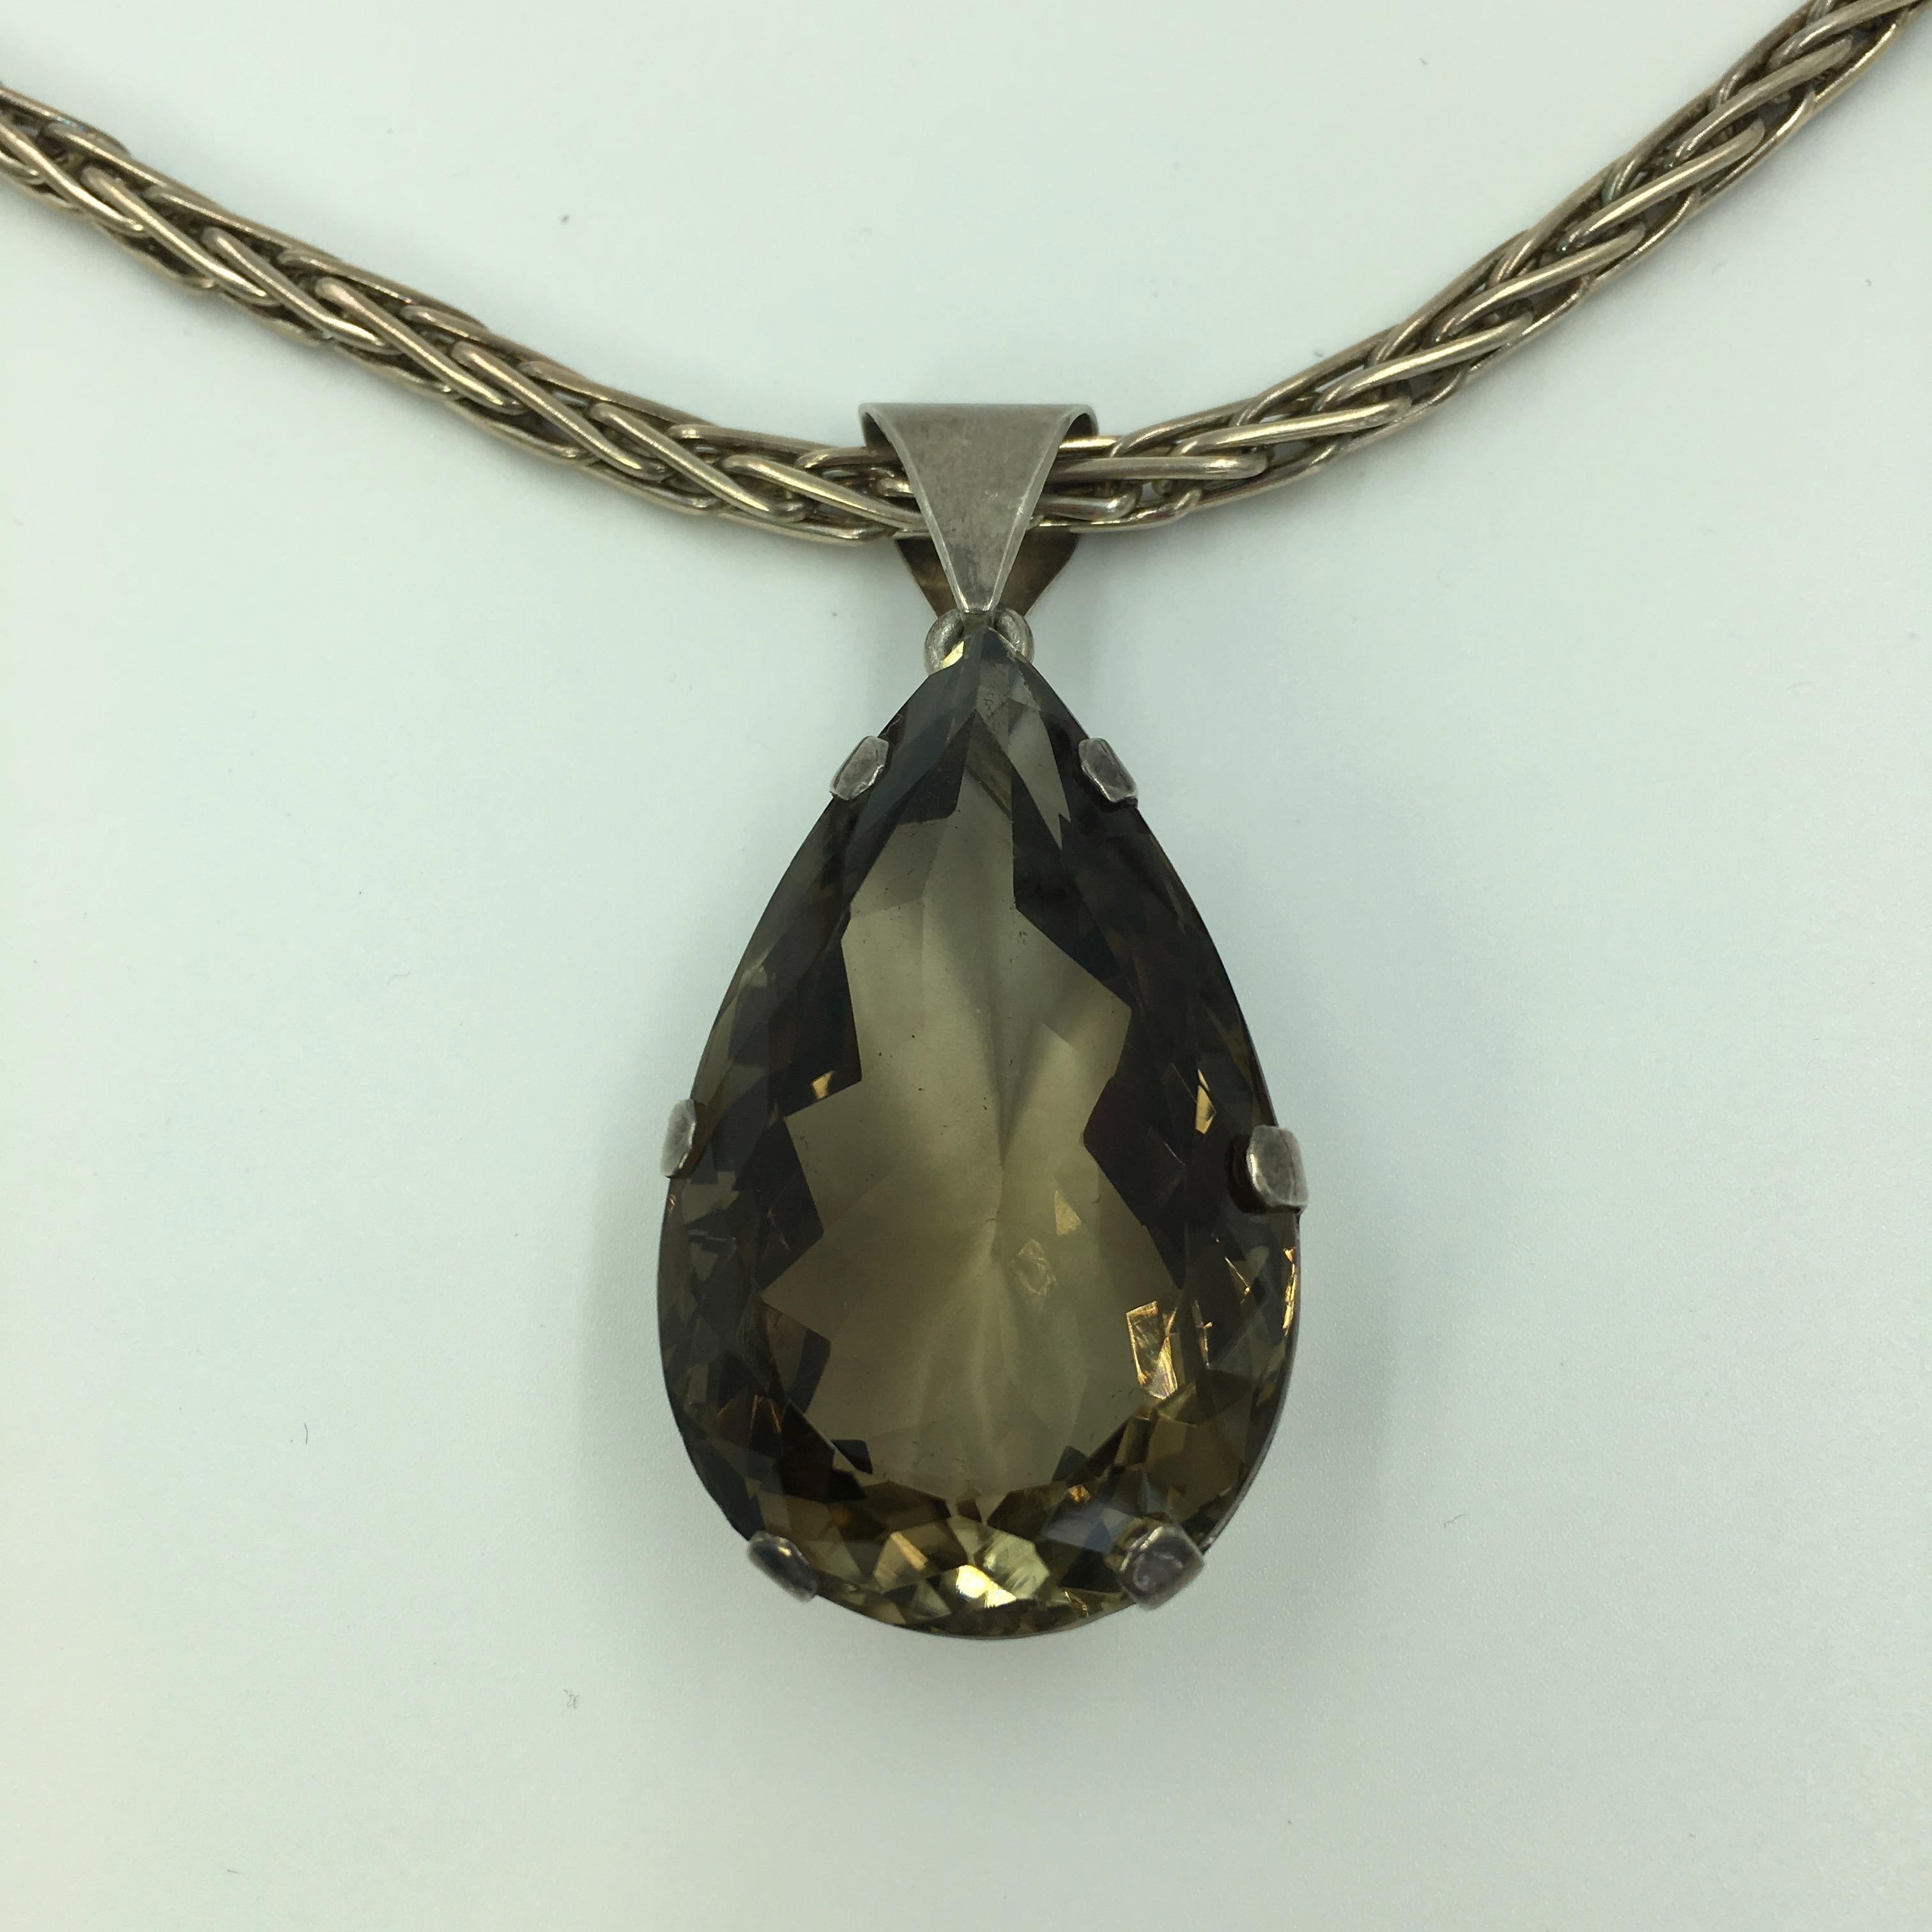 Pear Cut Gem Set Topaz and Sterling Silver Artisan Pendant with Foxtail Chain Necklace